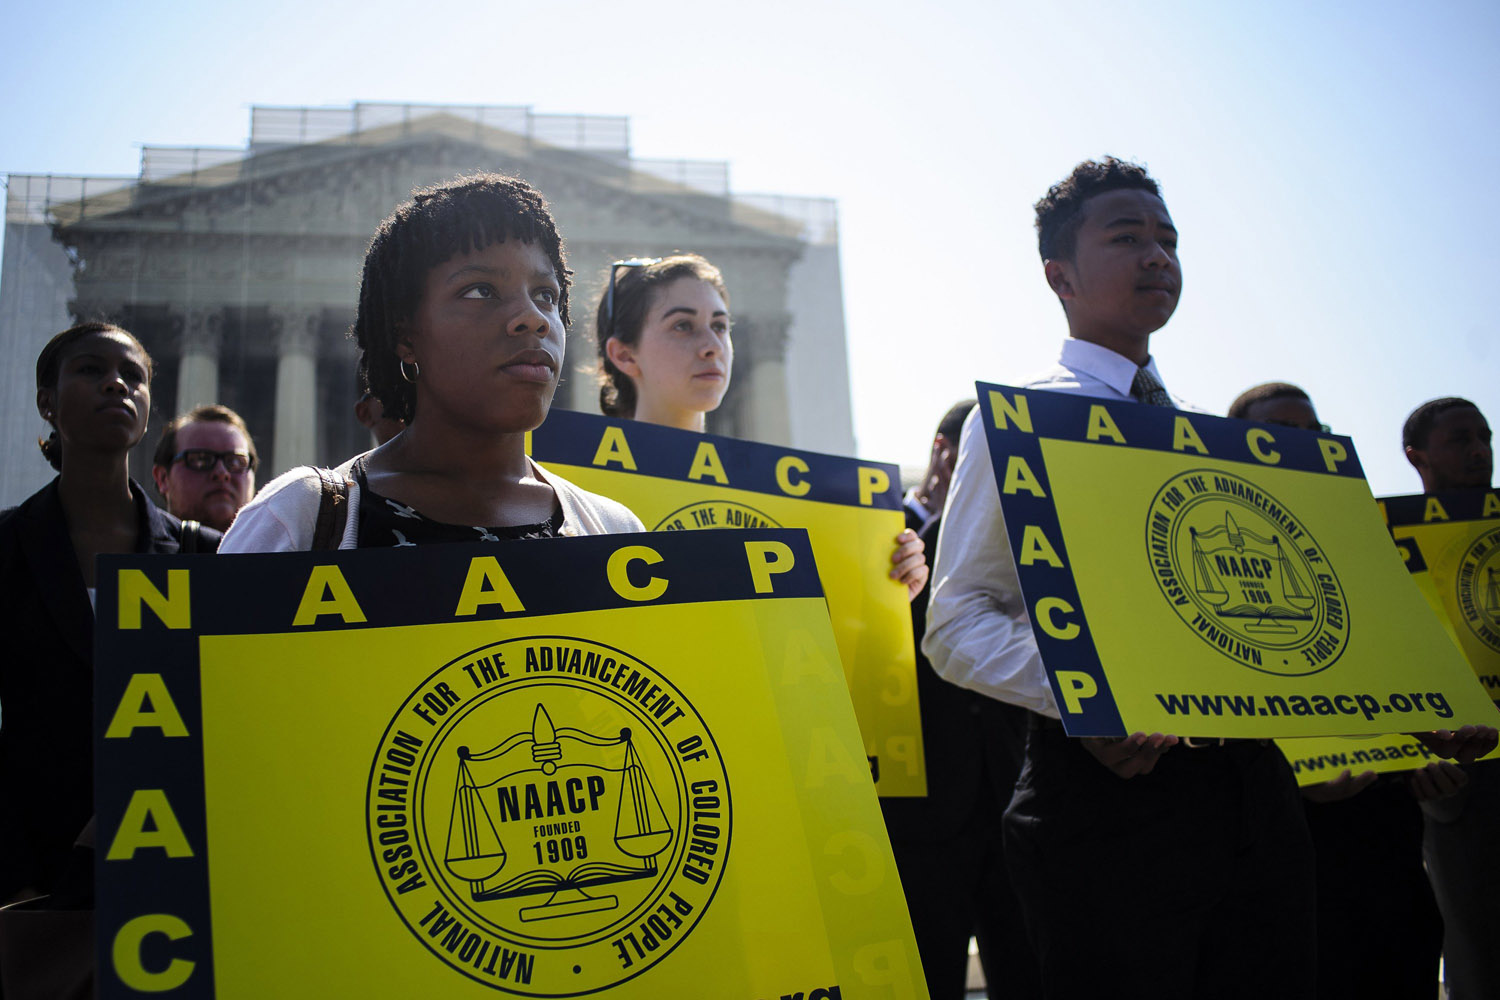 June 25, 2013. Jessica Pickens, 19, of Chicago, Il. stands with fellow voting rights activists outside the U.S. Supreme Court in Washingto, DC the day the court ruled on the Voting Rights Act striking down portions of the law.